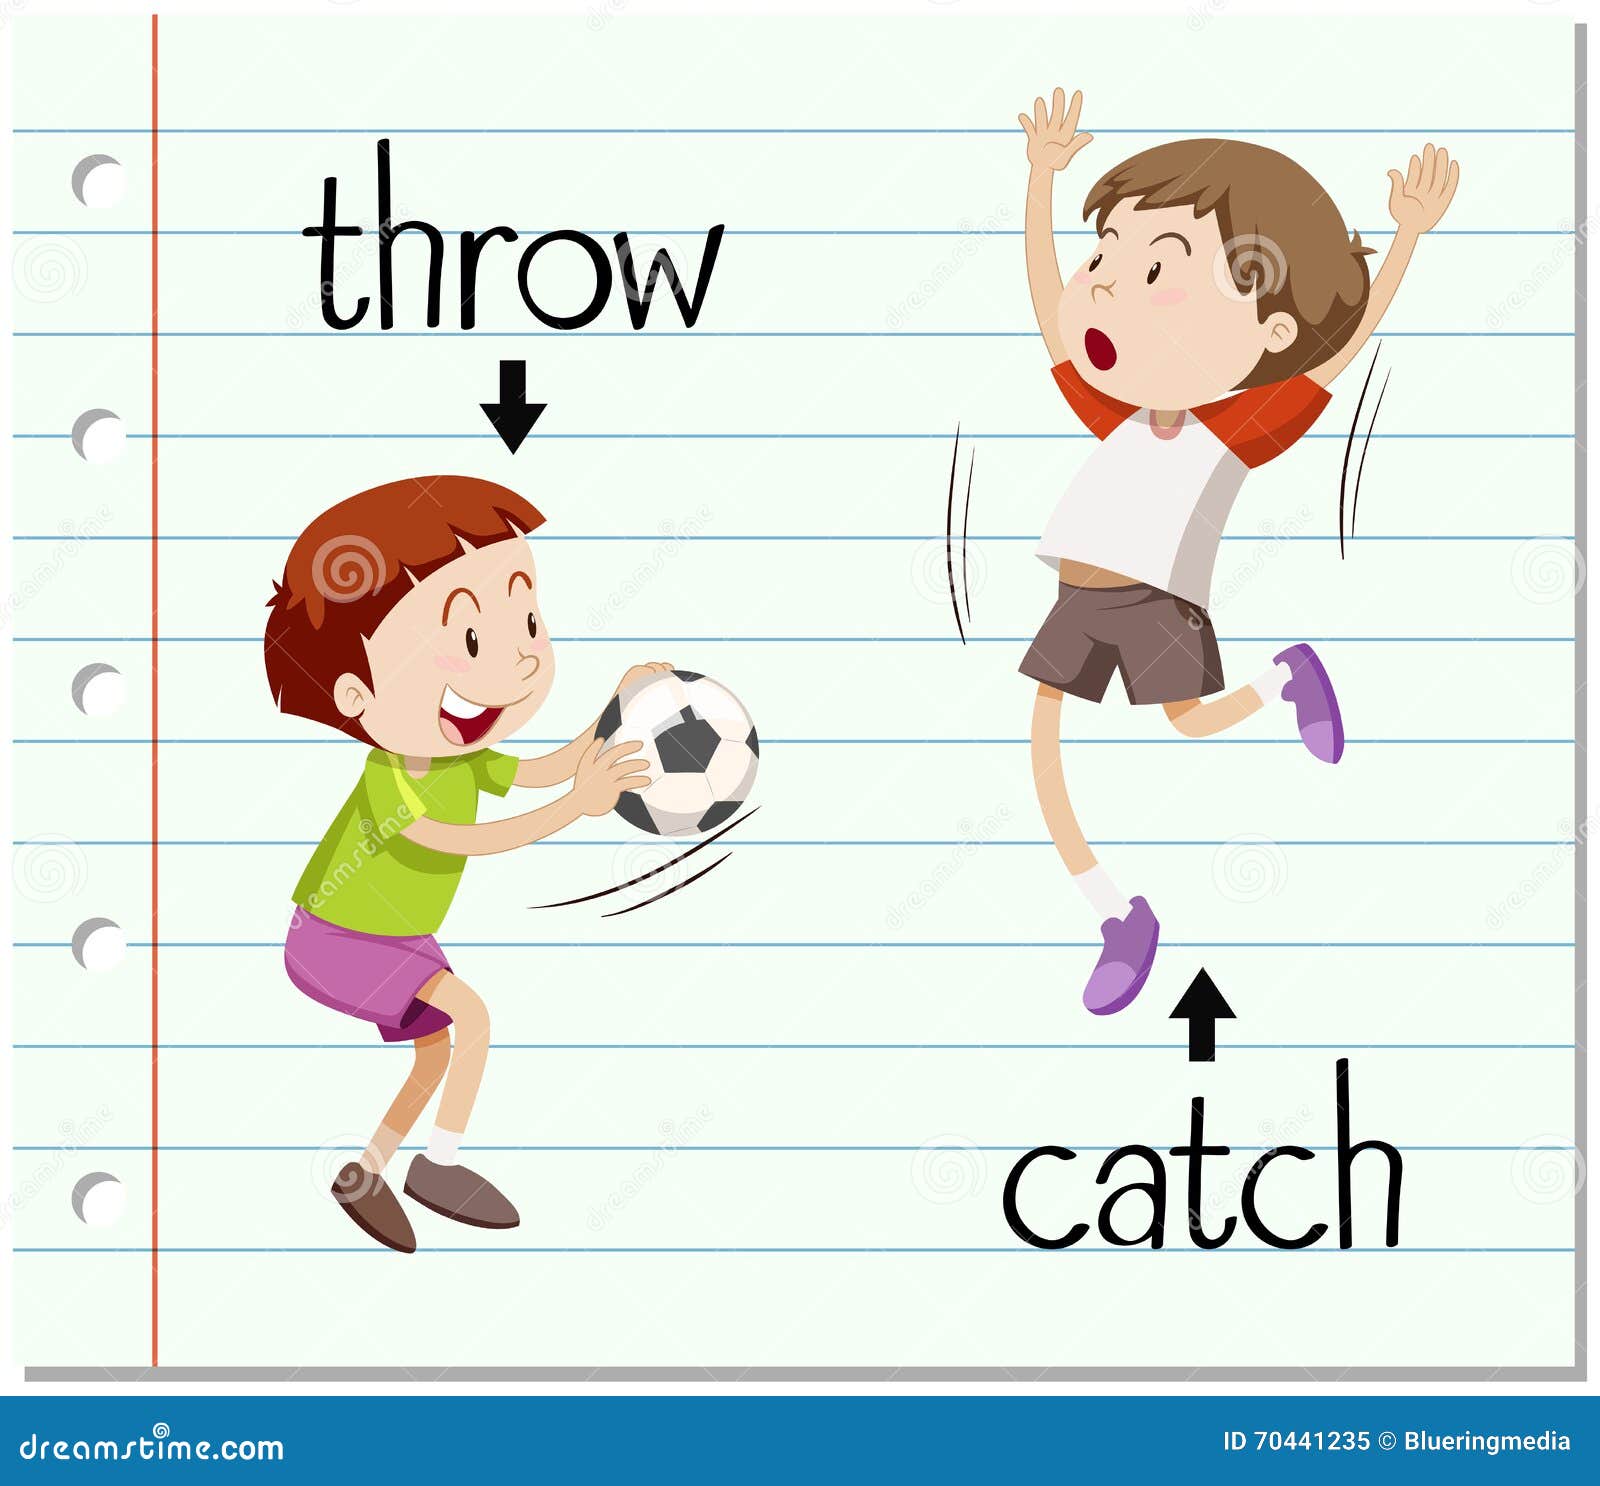 He can catch. Throw catch. Карточка на английском Throw. Catch the Ball Flashcard. Catch в английском.